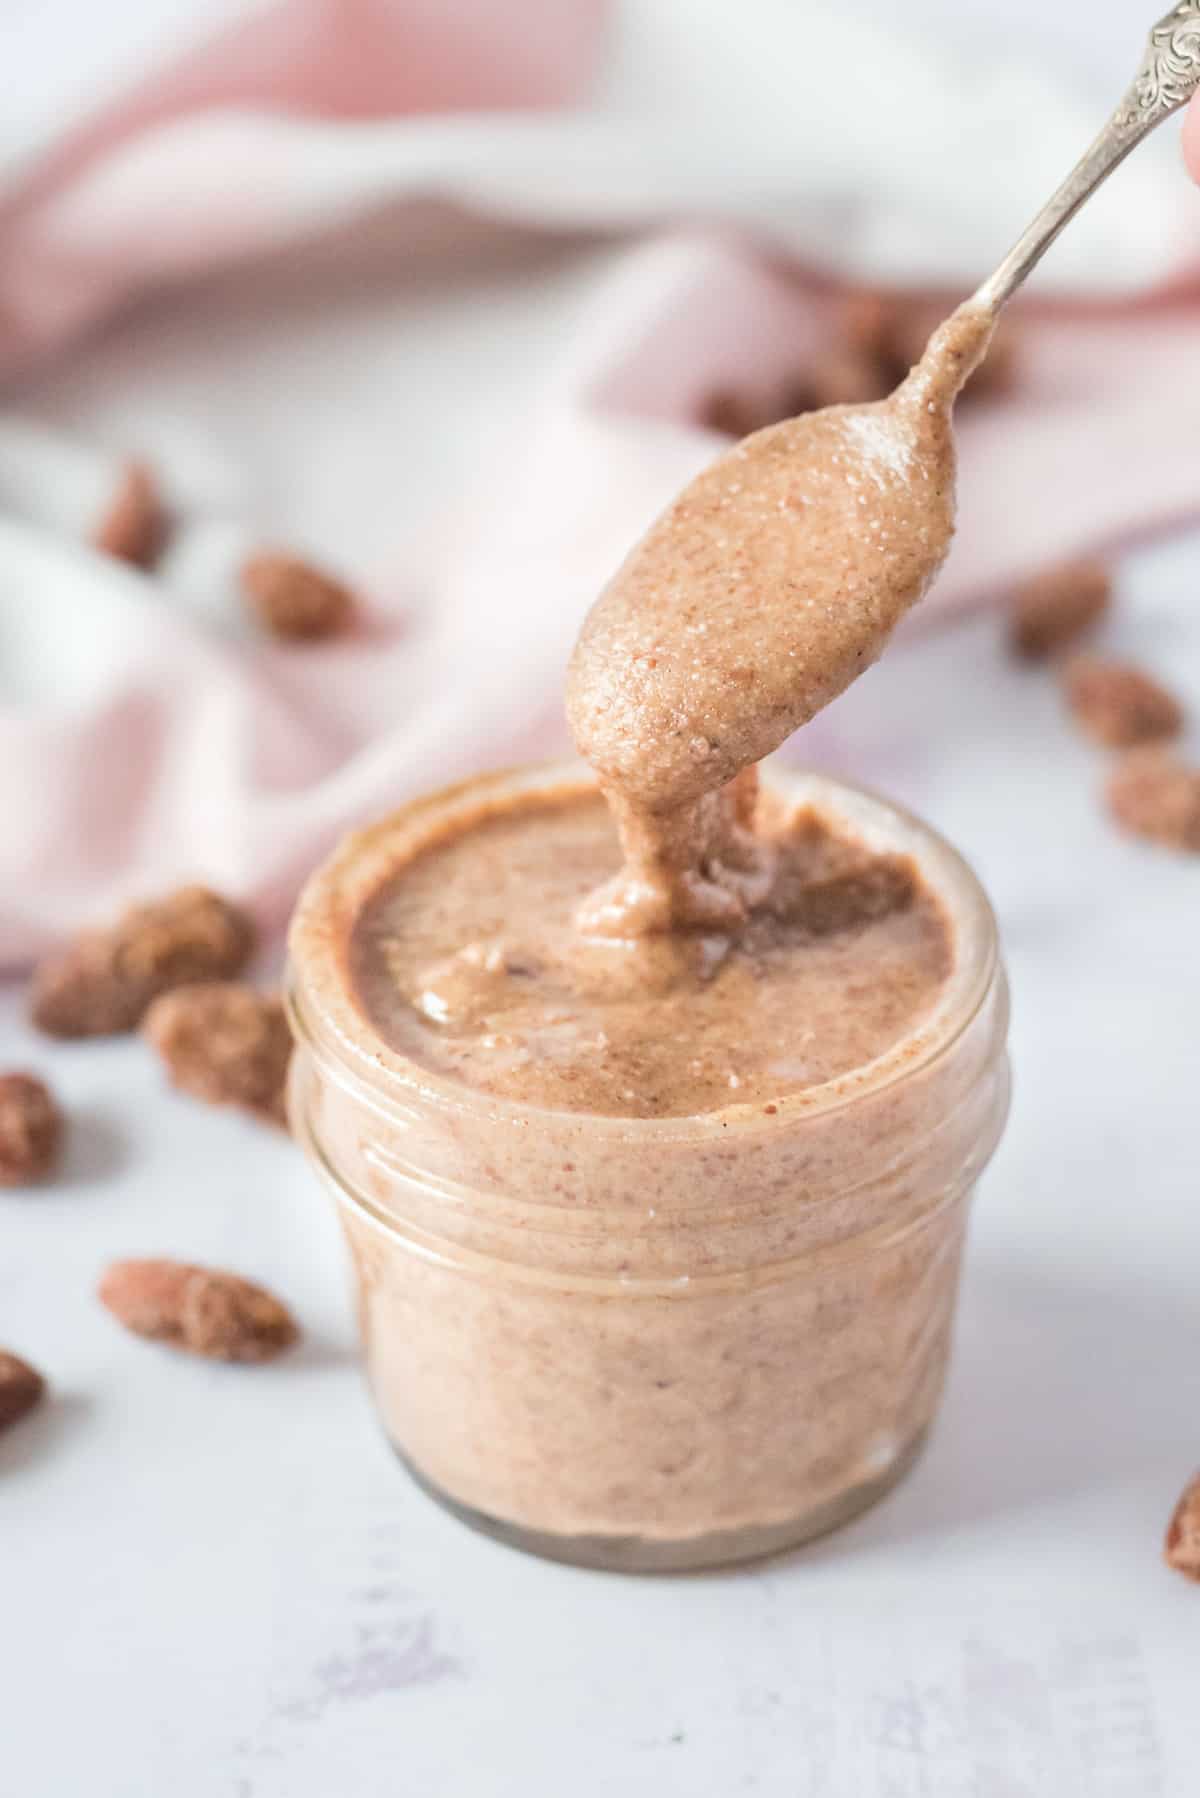 A spoon getting nut butter out of a jar.